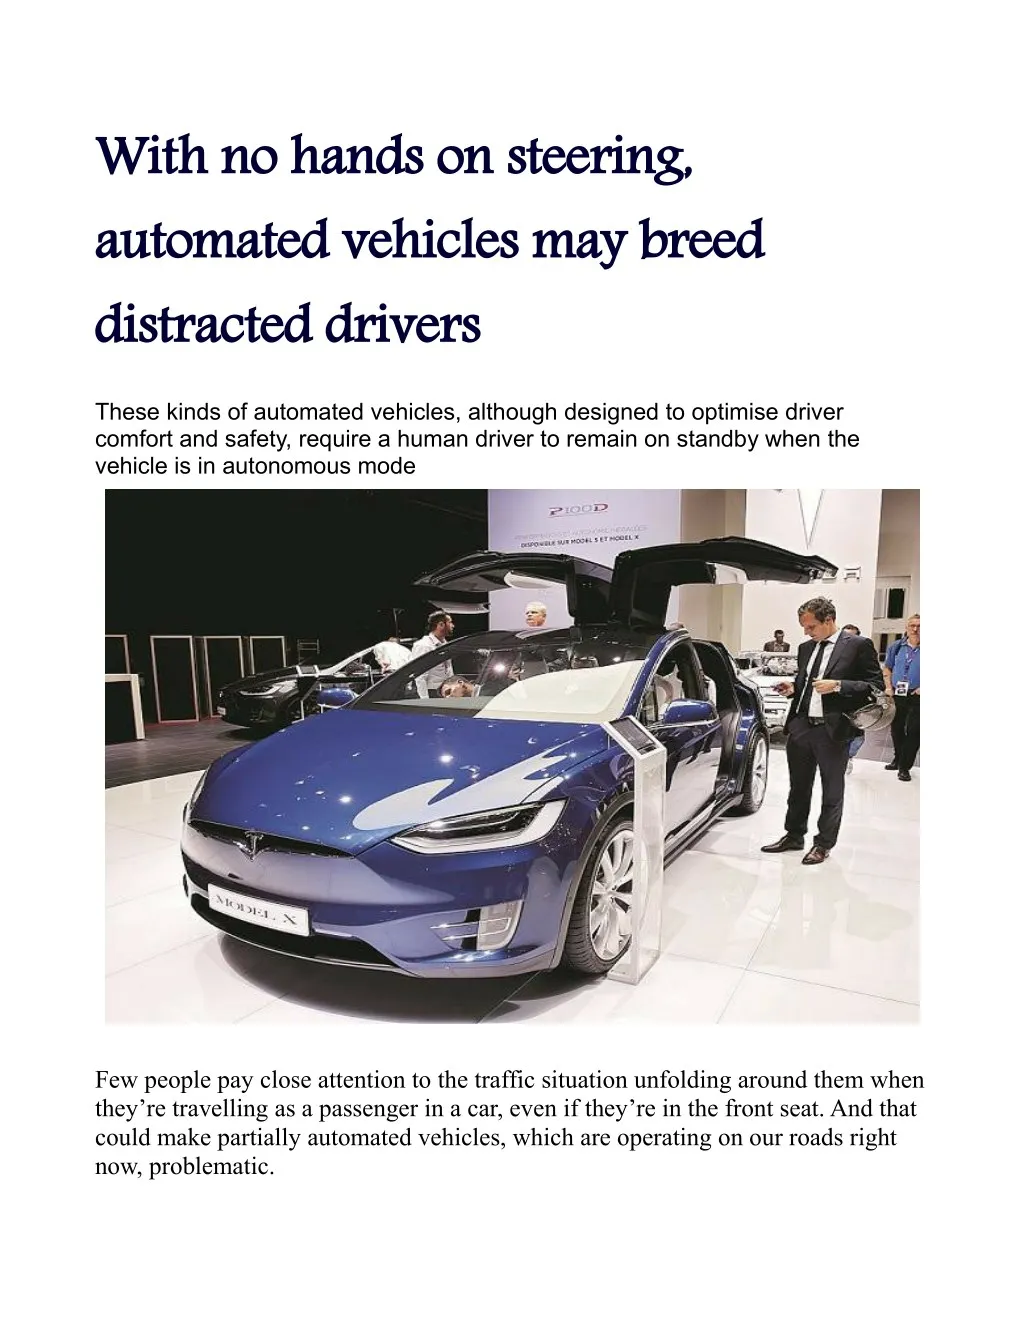 with no hands on steering automated vehicles